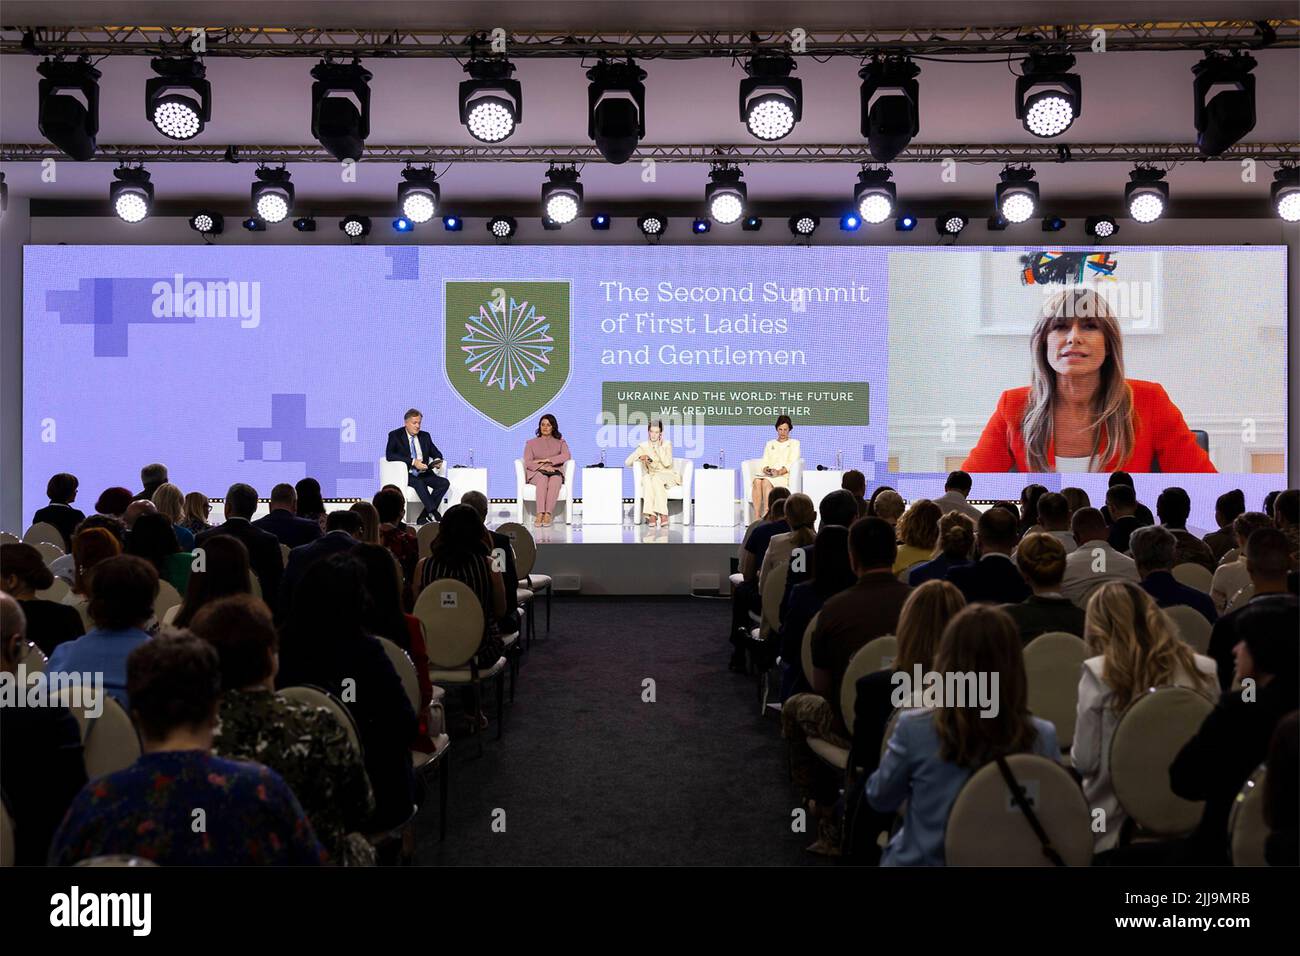 Kyiv, Ukraine. 23rd July, 2022. Spanish First Lady Begona Gomez joins a panel by remote link, at the 2nd annual Summit of First Ladies and Gentlemen on the grounds of the Saint Sophia Cathedral, July 23, 2022 in Kyiv, Ukraine. Onstage left to right are: TV presenter Piers Morgan, First Lady of Lithuania Diana Nausedene, Ukraine First Lady Olena Zelenska and First Lady of Latvia Andra Levite. Credit: Ukrainian Presidential Press Office/Ukraine Presidency/Alamy Live News Stock Photo